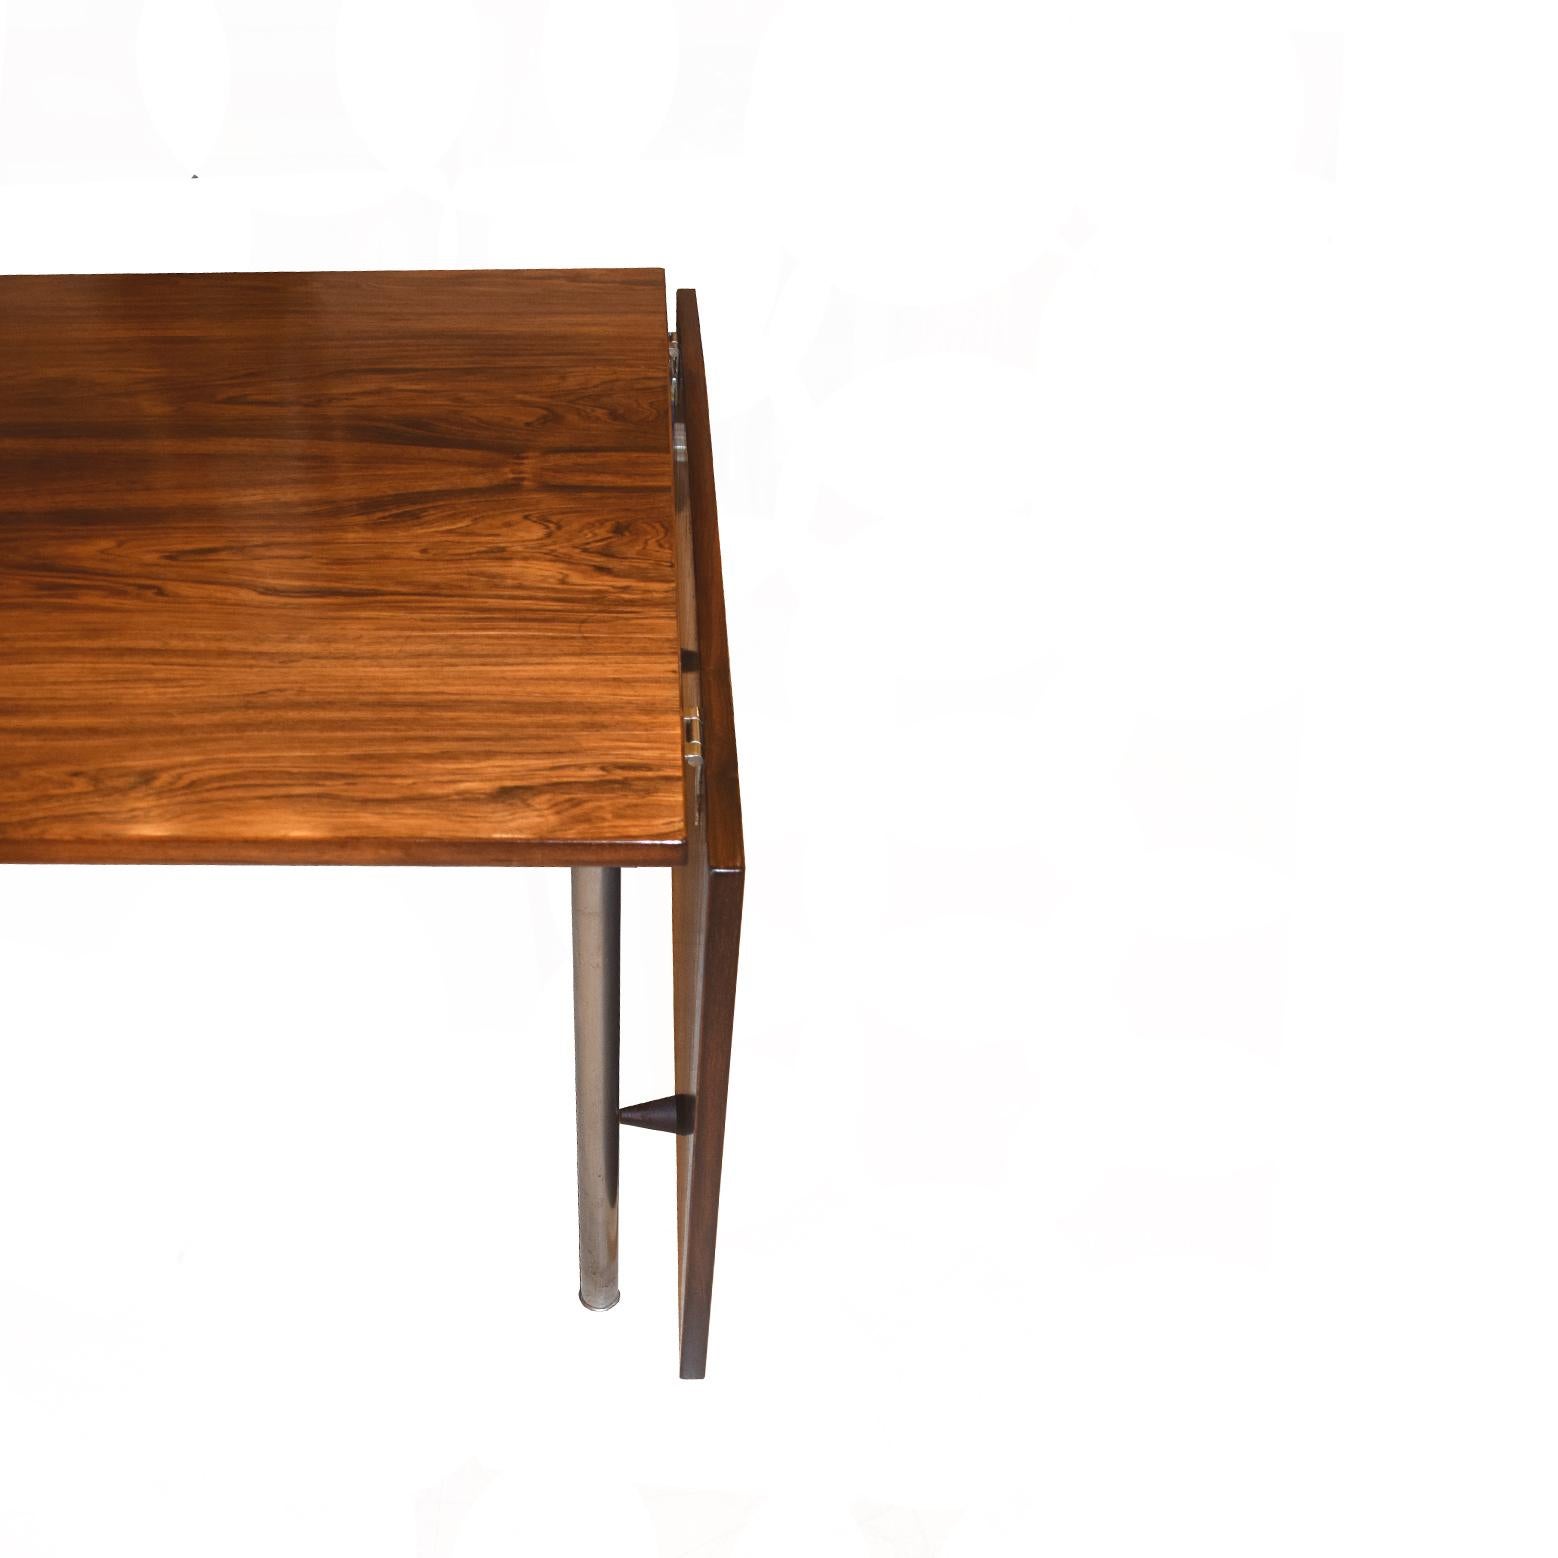 Mid-20th Century Hans J. Wegner AT-319 Rosewood & Steel Drop Leaf Dining Table for Andreas Tuck For Sale